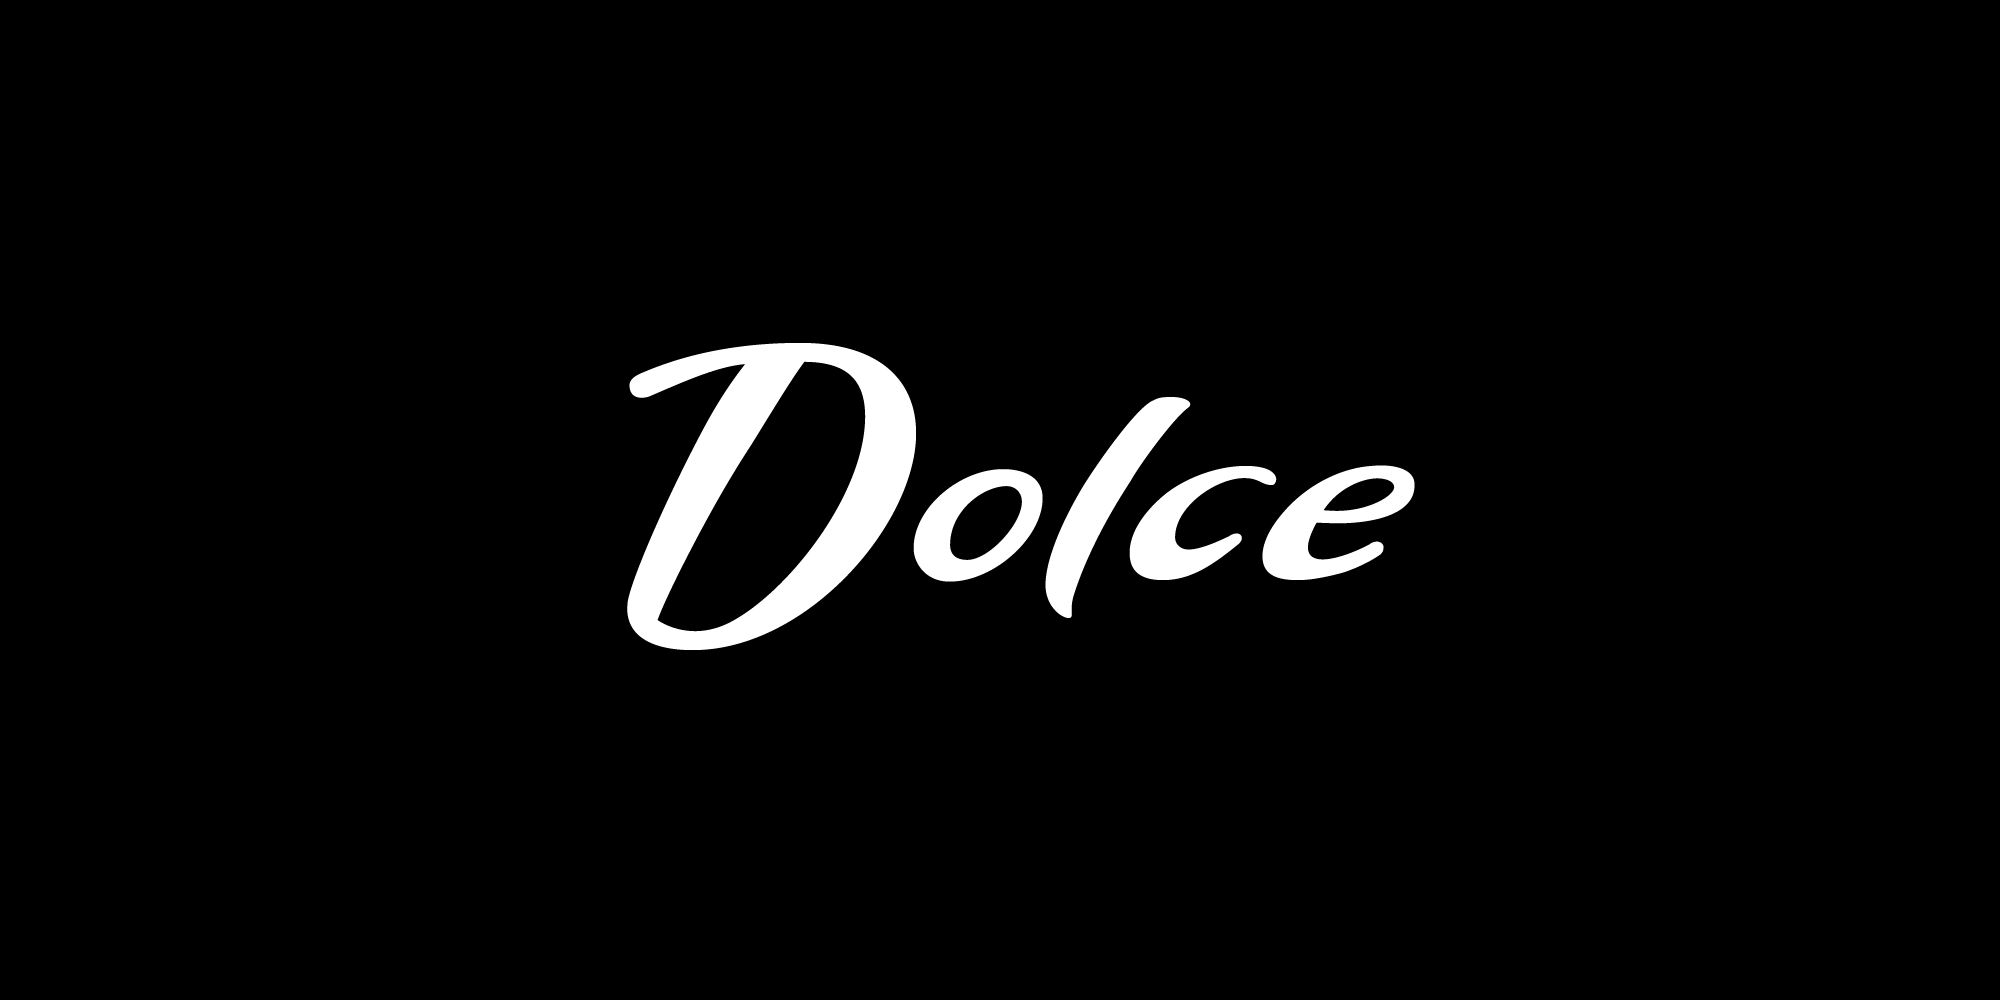 Dolce font nameplate